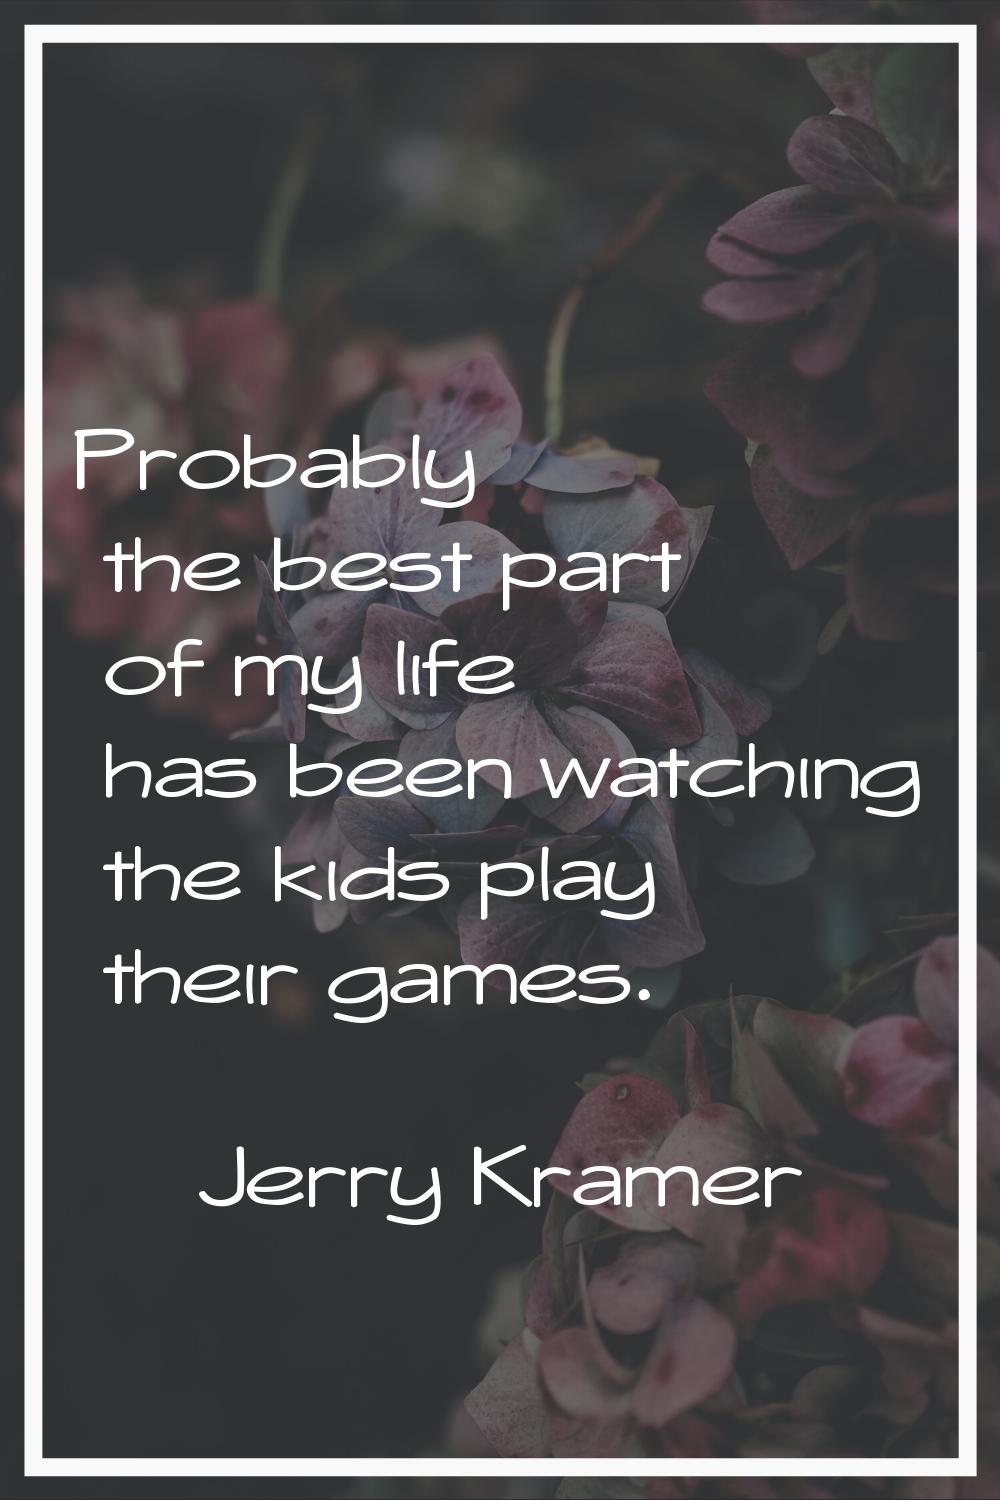 Probably the best part of my life has been watching the kids play their games.